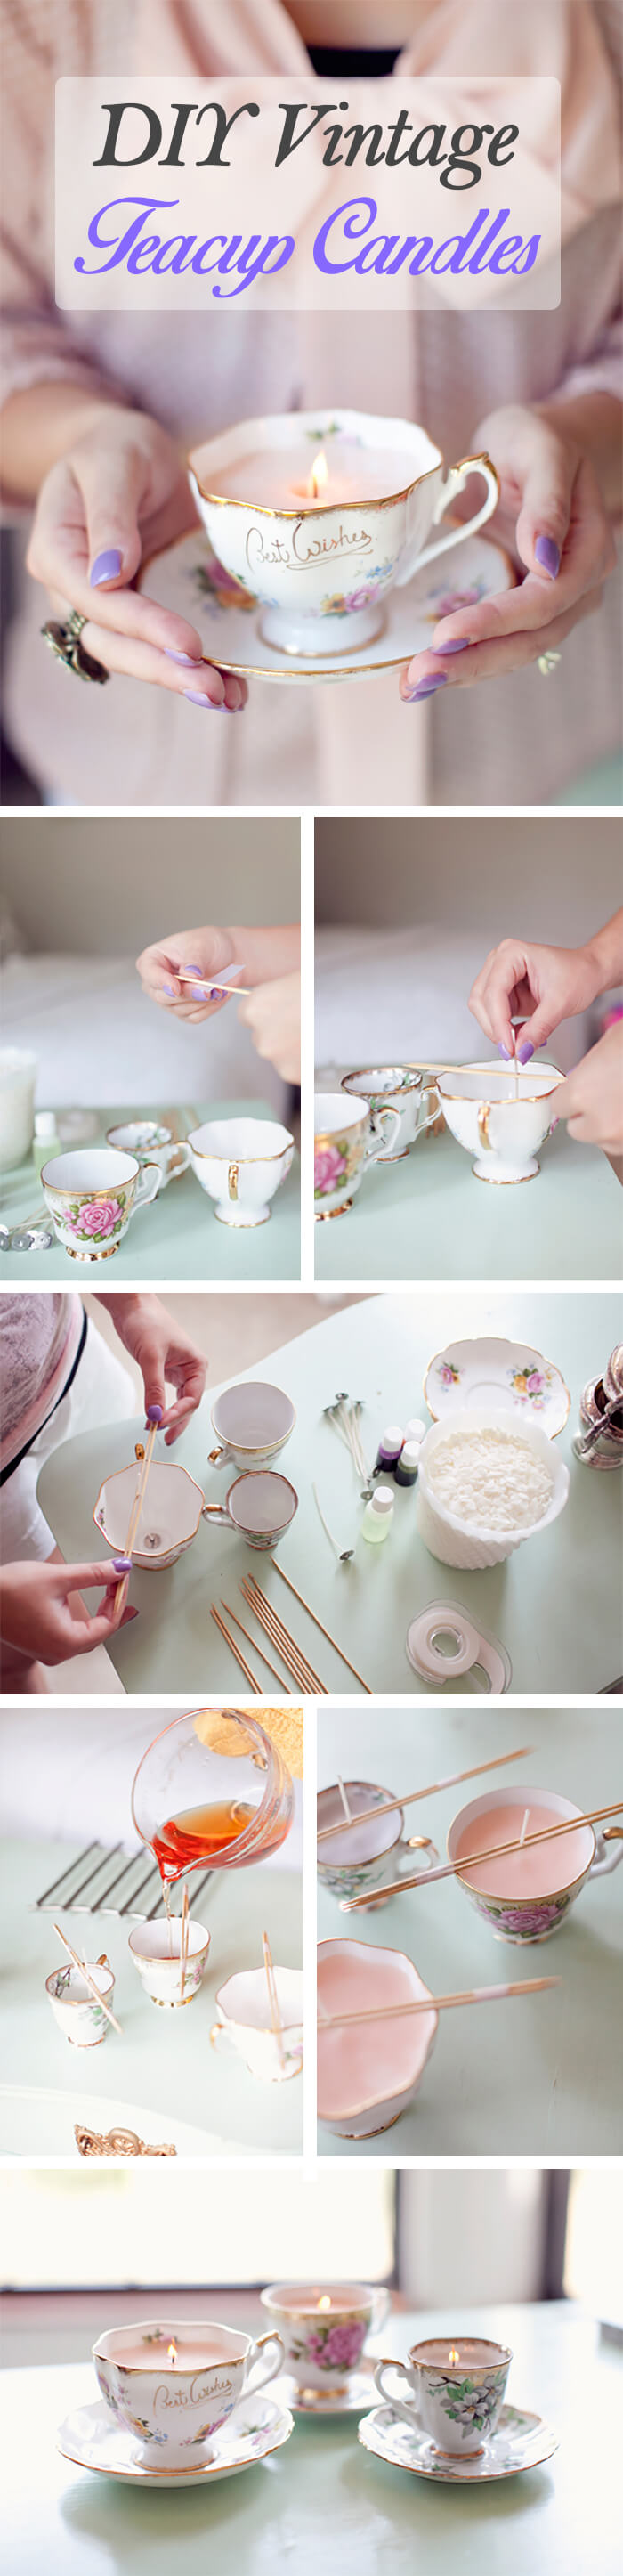 Tea-For-Two DIY Candles